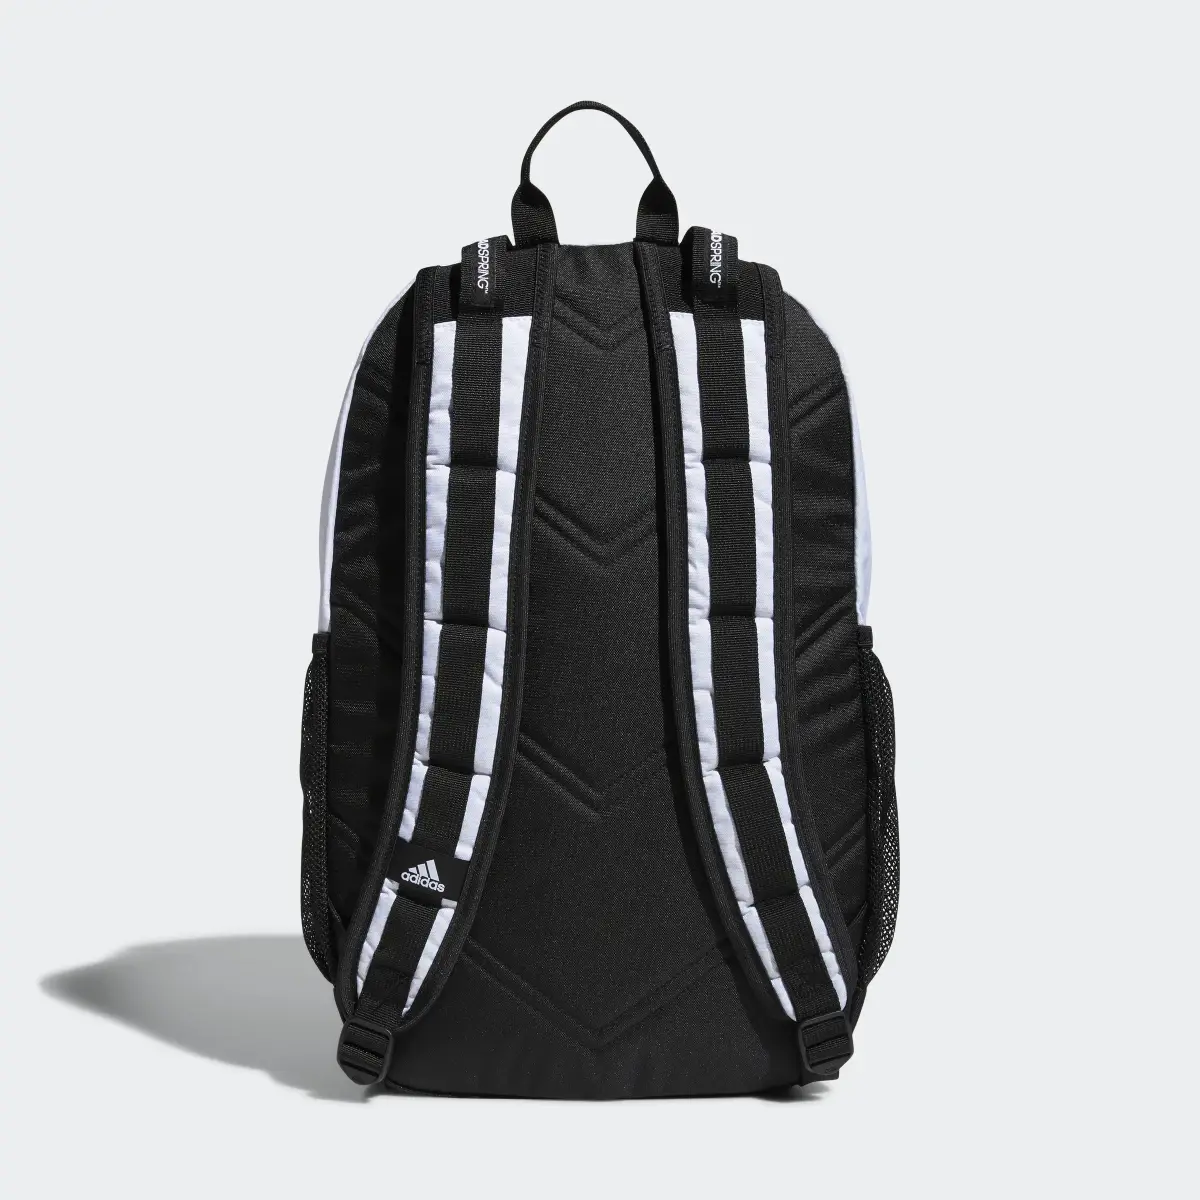 Adidas Excel Backpack. 3